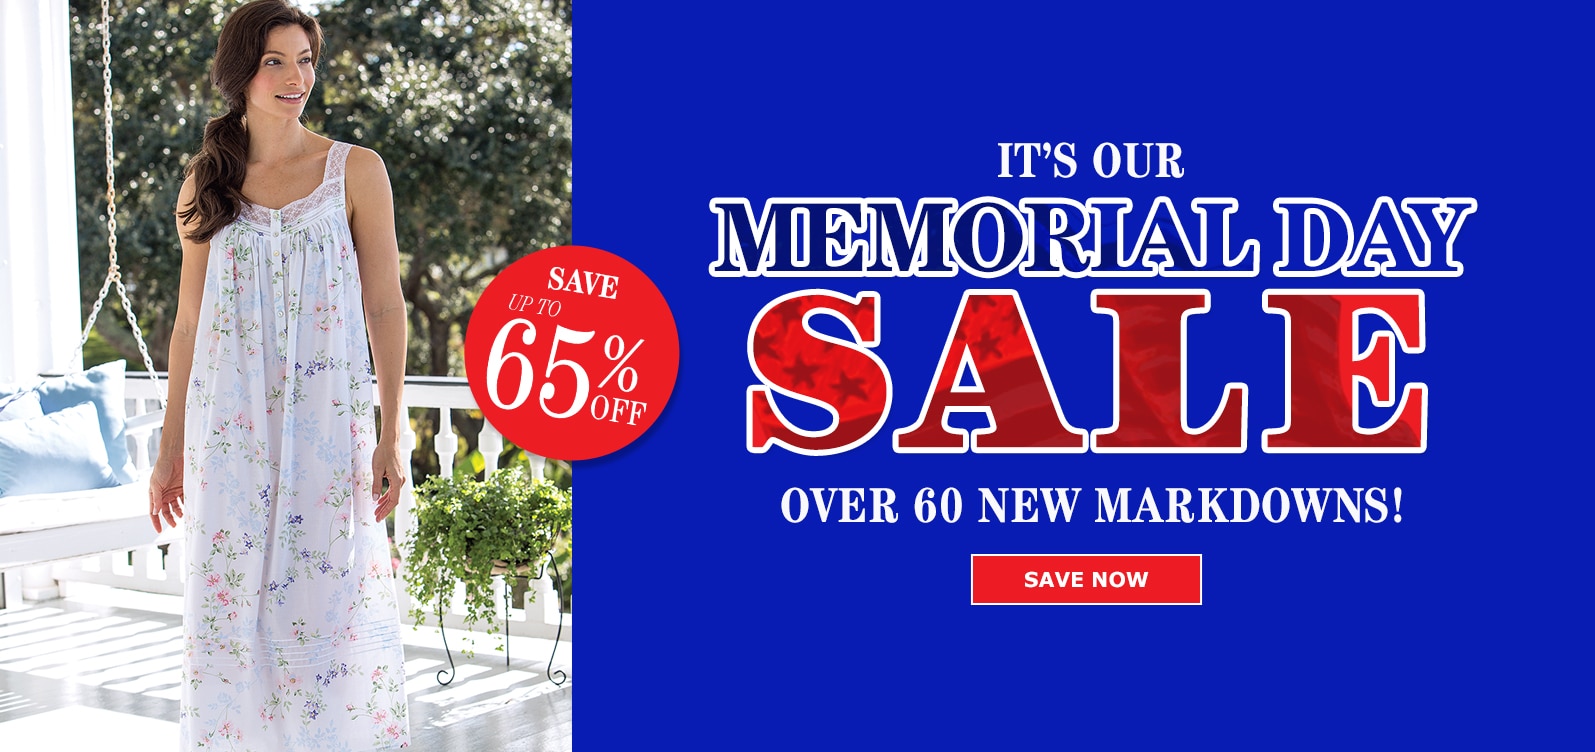 It's Our Memorial Day Sale! Over 60 New Markdowns! Up to 65% Off. Save Now